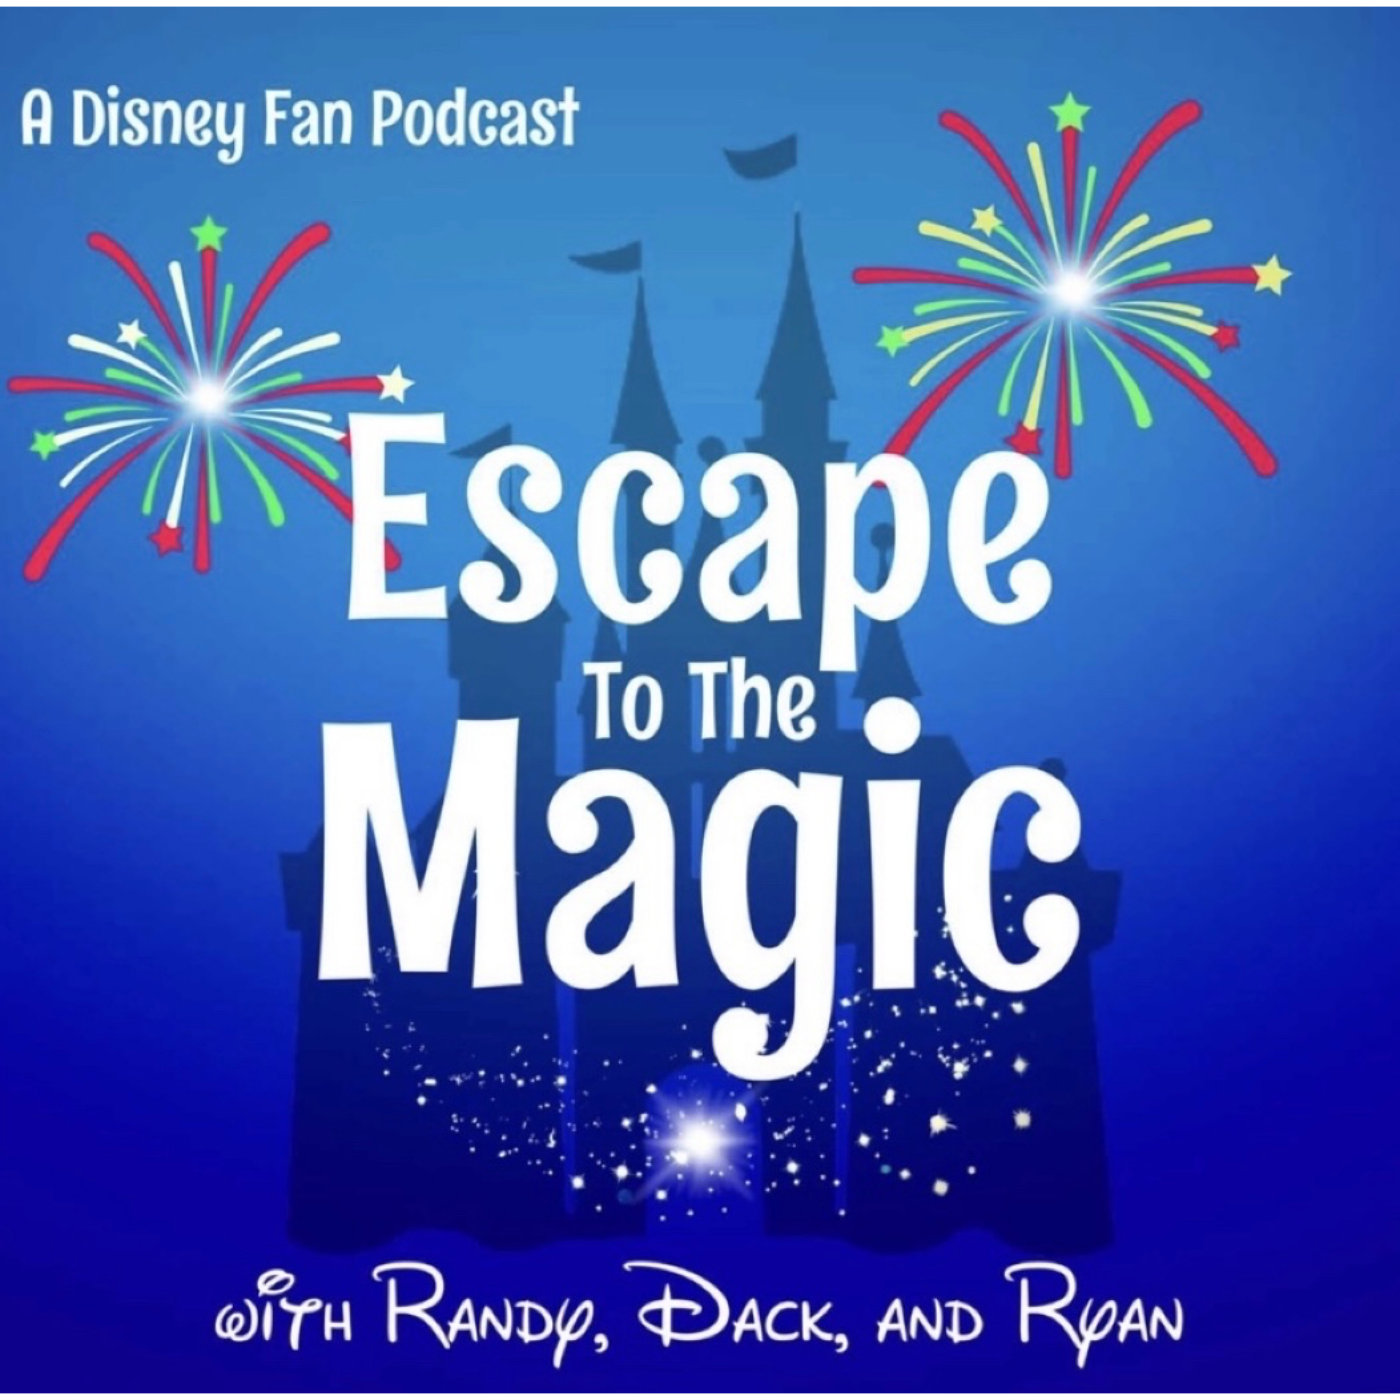 Ep 41 - All About runDisney!